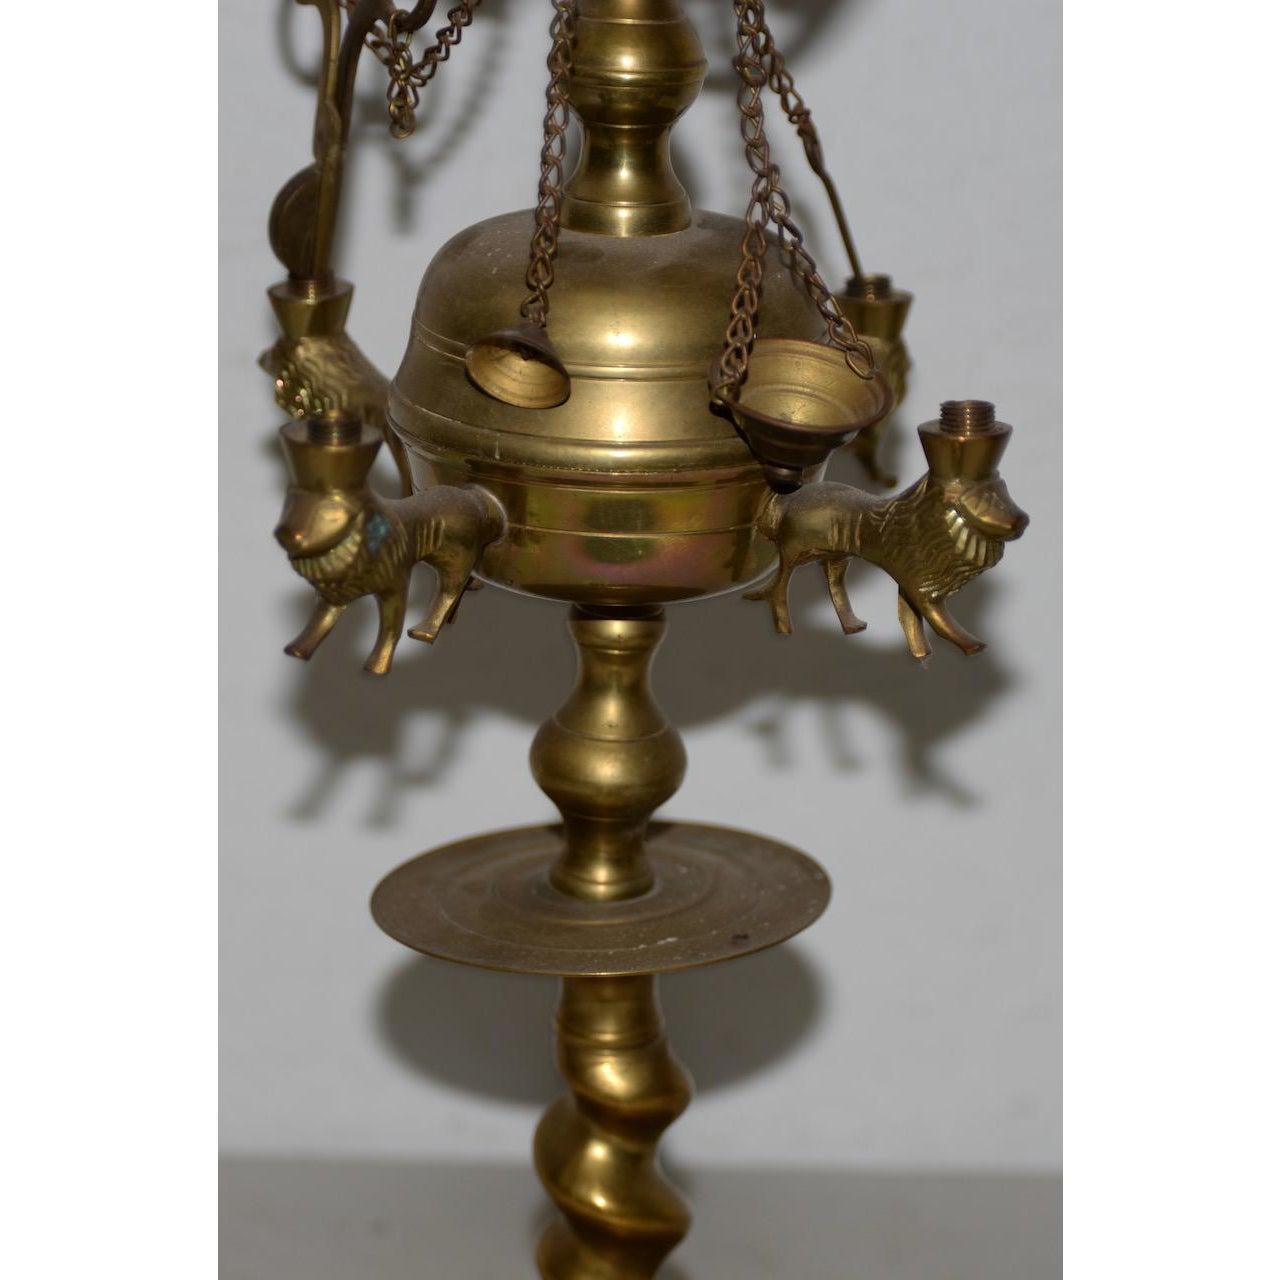 19th century Middle East brass oil lamp

Fine old oil lamp with swans and lions. The piece appears to be in very nice condition, though a piece or two may be Mission. We are unsure how this is suppose to work, but it's a nice decorative